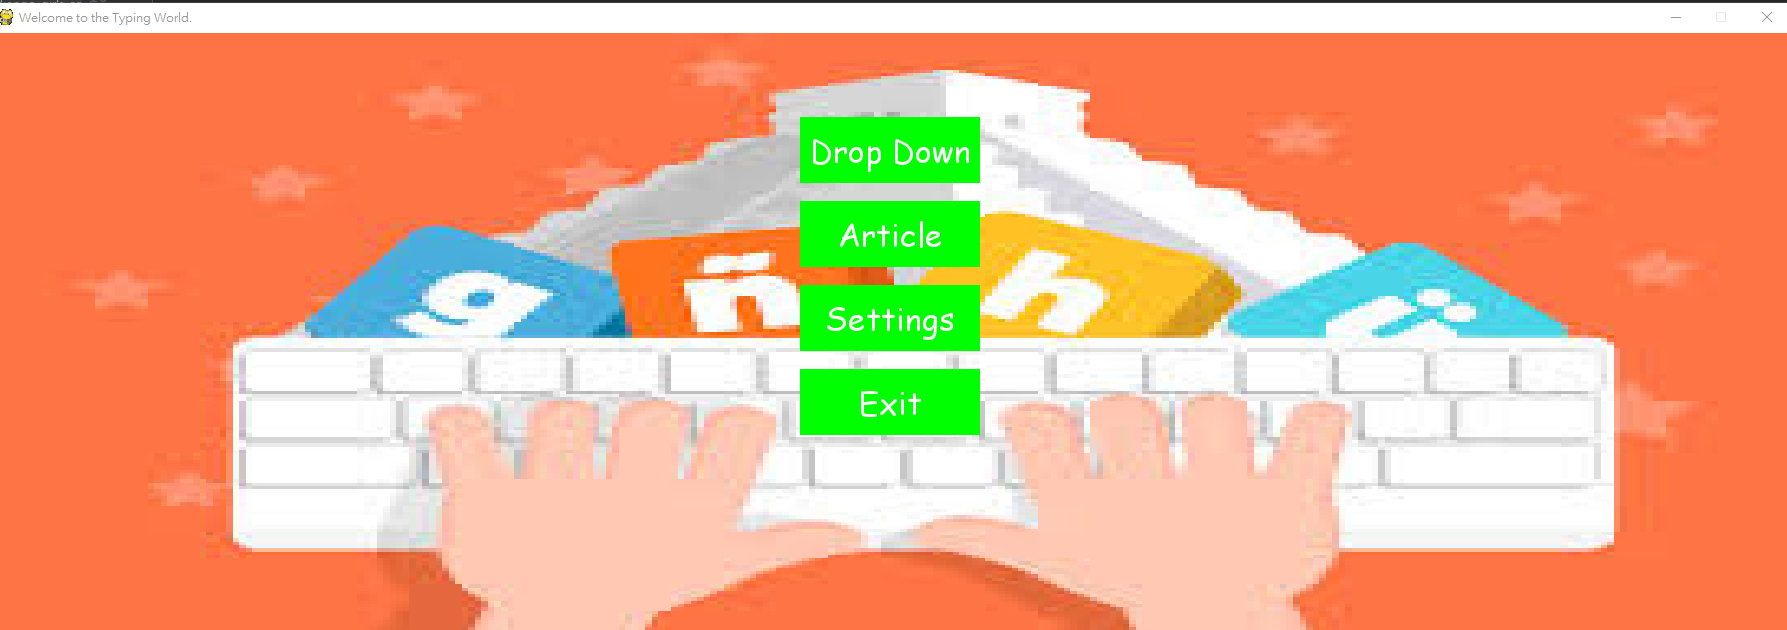 https://raw.githubusercontent.com/CarsonSlovoka/typing-game/master/typing_game/_static/demo/home.png